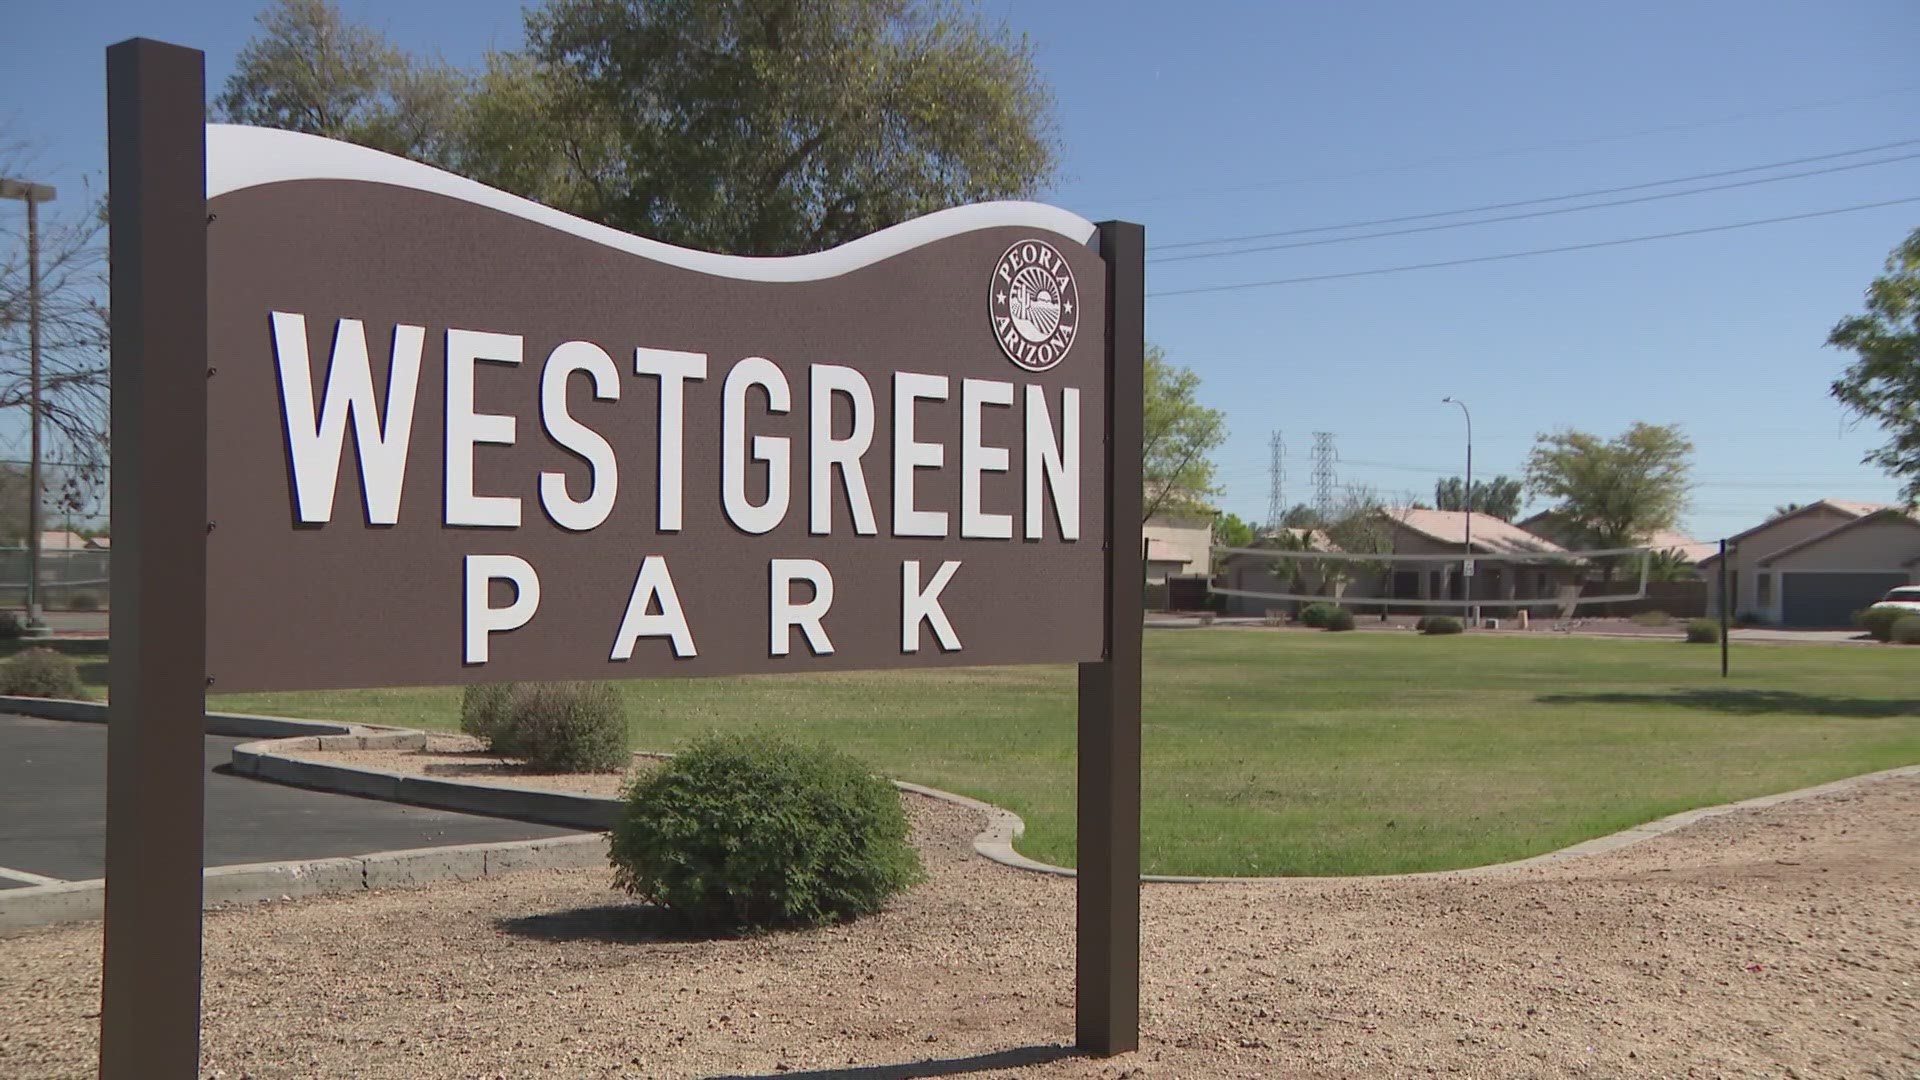 The 30-year-old Peoria mom is facing criminal charges after a confrontation at a local park on Tuesday got out of control.